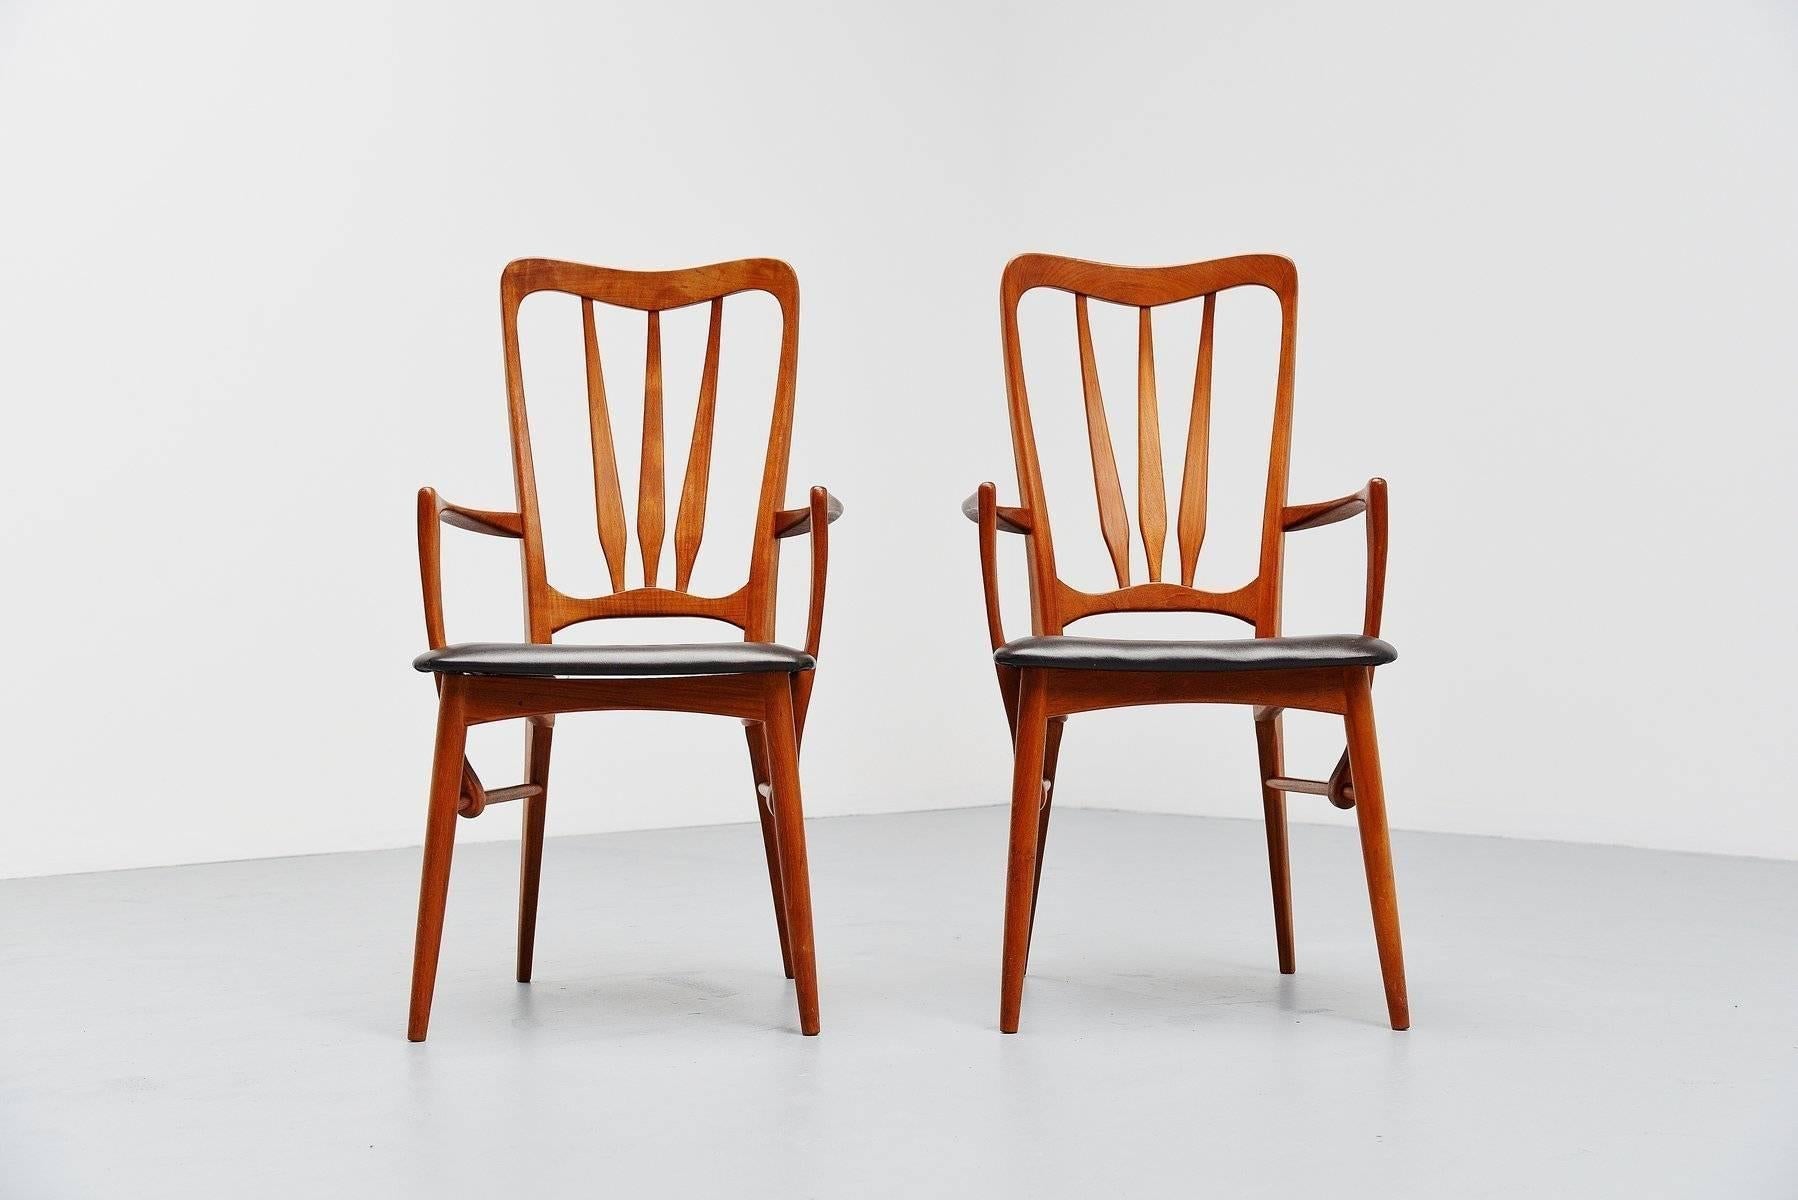 Very nice Ingrid armchair designed by Niels Kofoed for Hornslet Mobelfabrik, Denmark, 1960. These chairs have solid teak wooden frames and black leather upholstery. These chairs a very nice organic shaped and very well handcrafted. The chairs are in